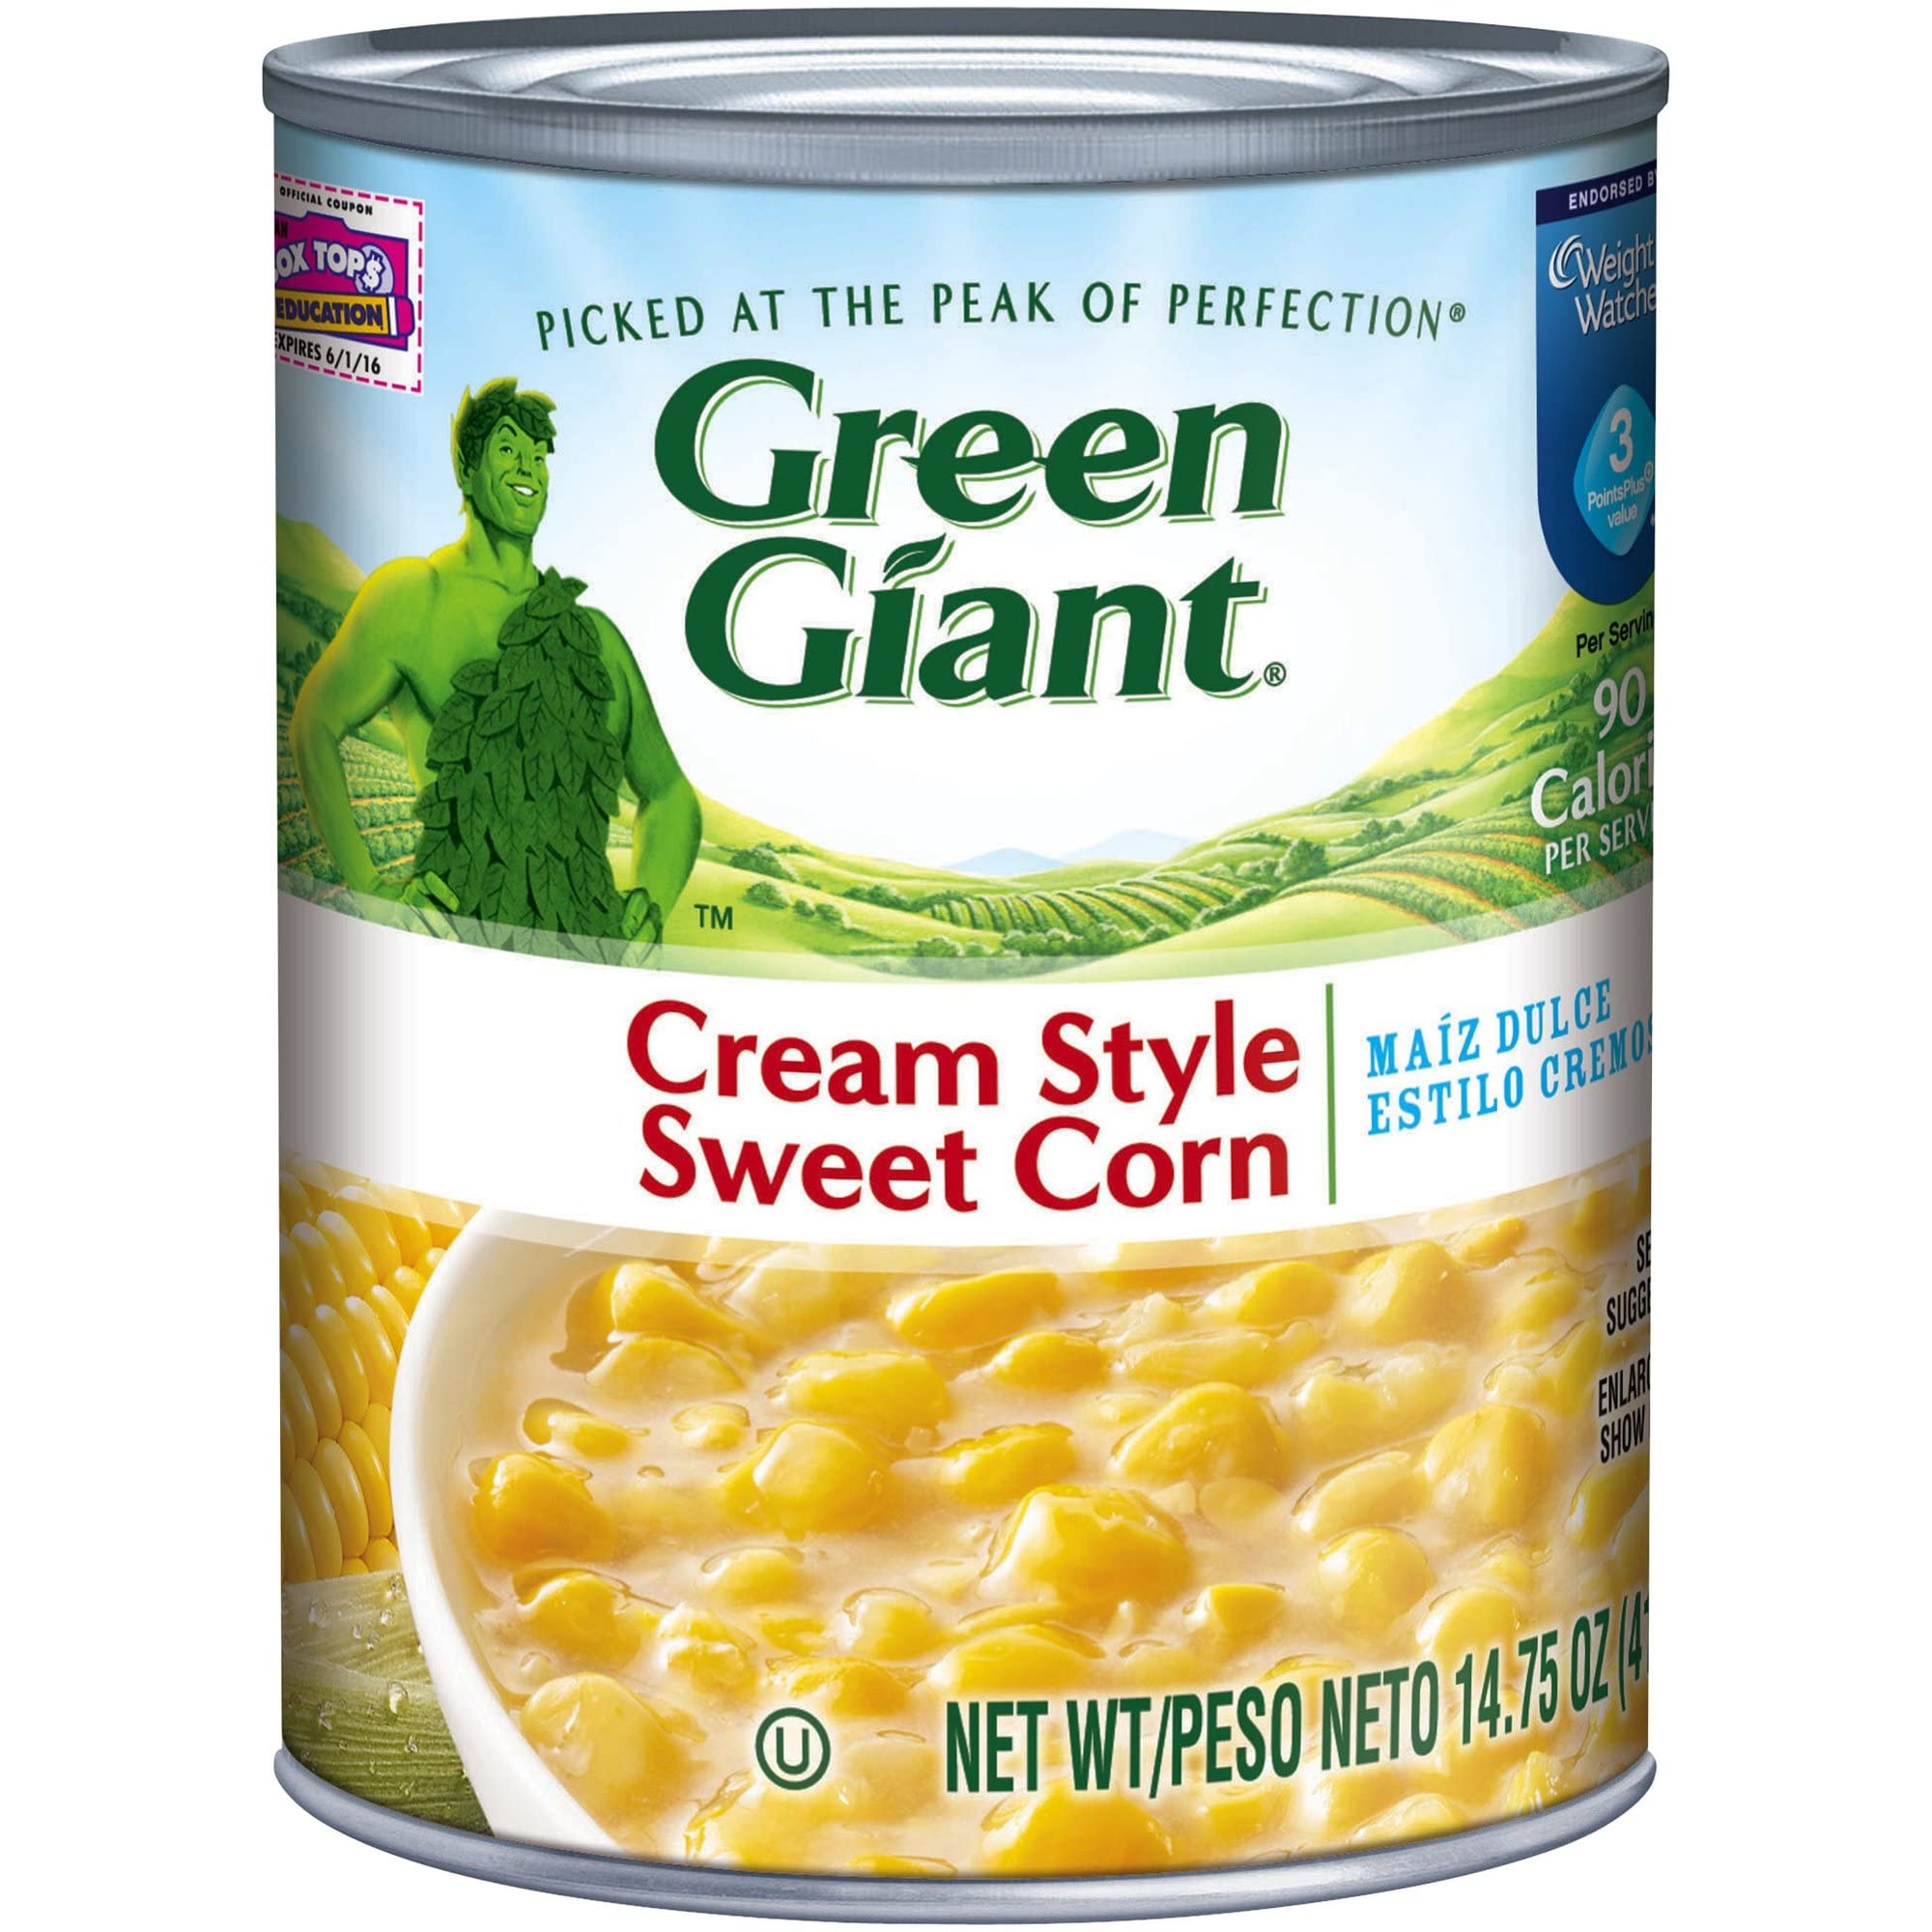 14.75oz Green Giant Canned Cream Style Sweet Corn $0.66 w/ S&S + Free Shipping w/ Prime or on $35+